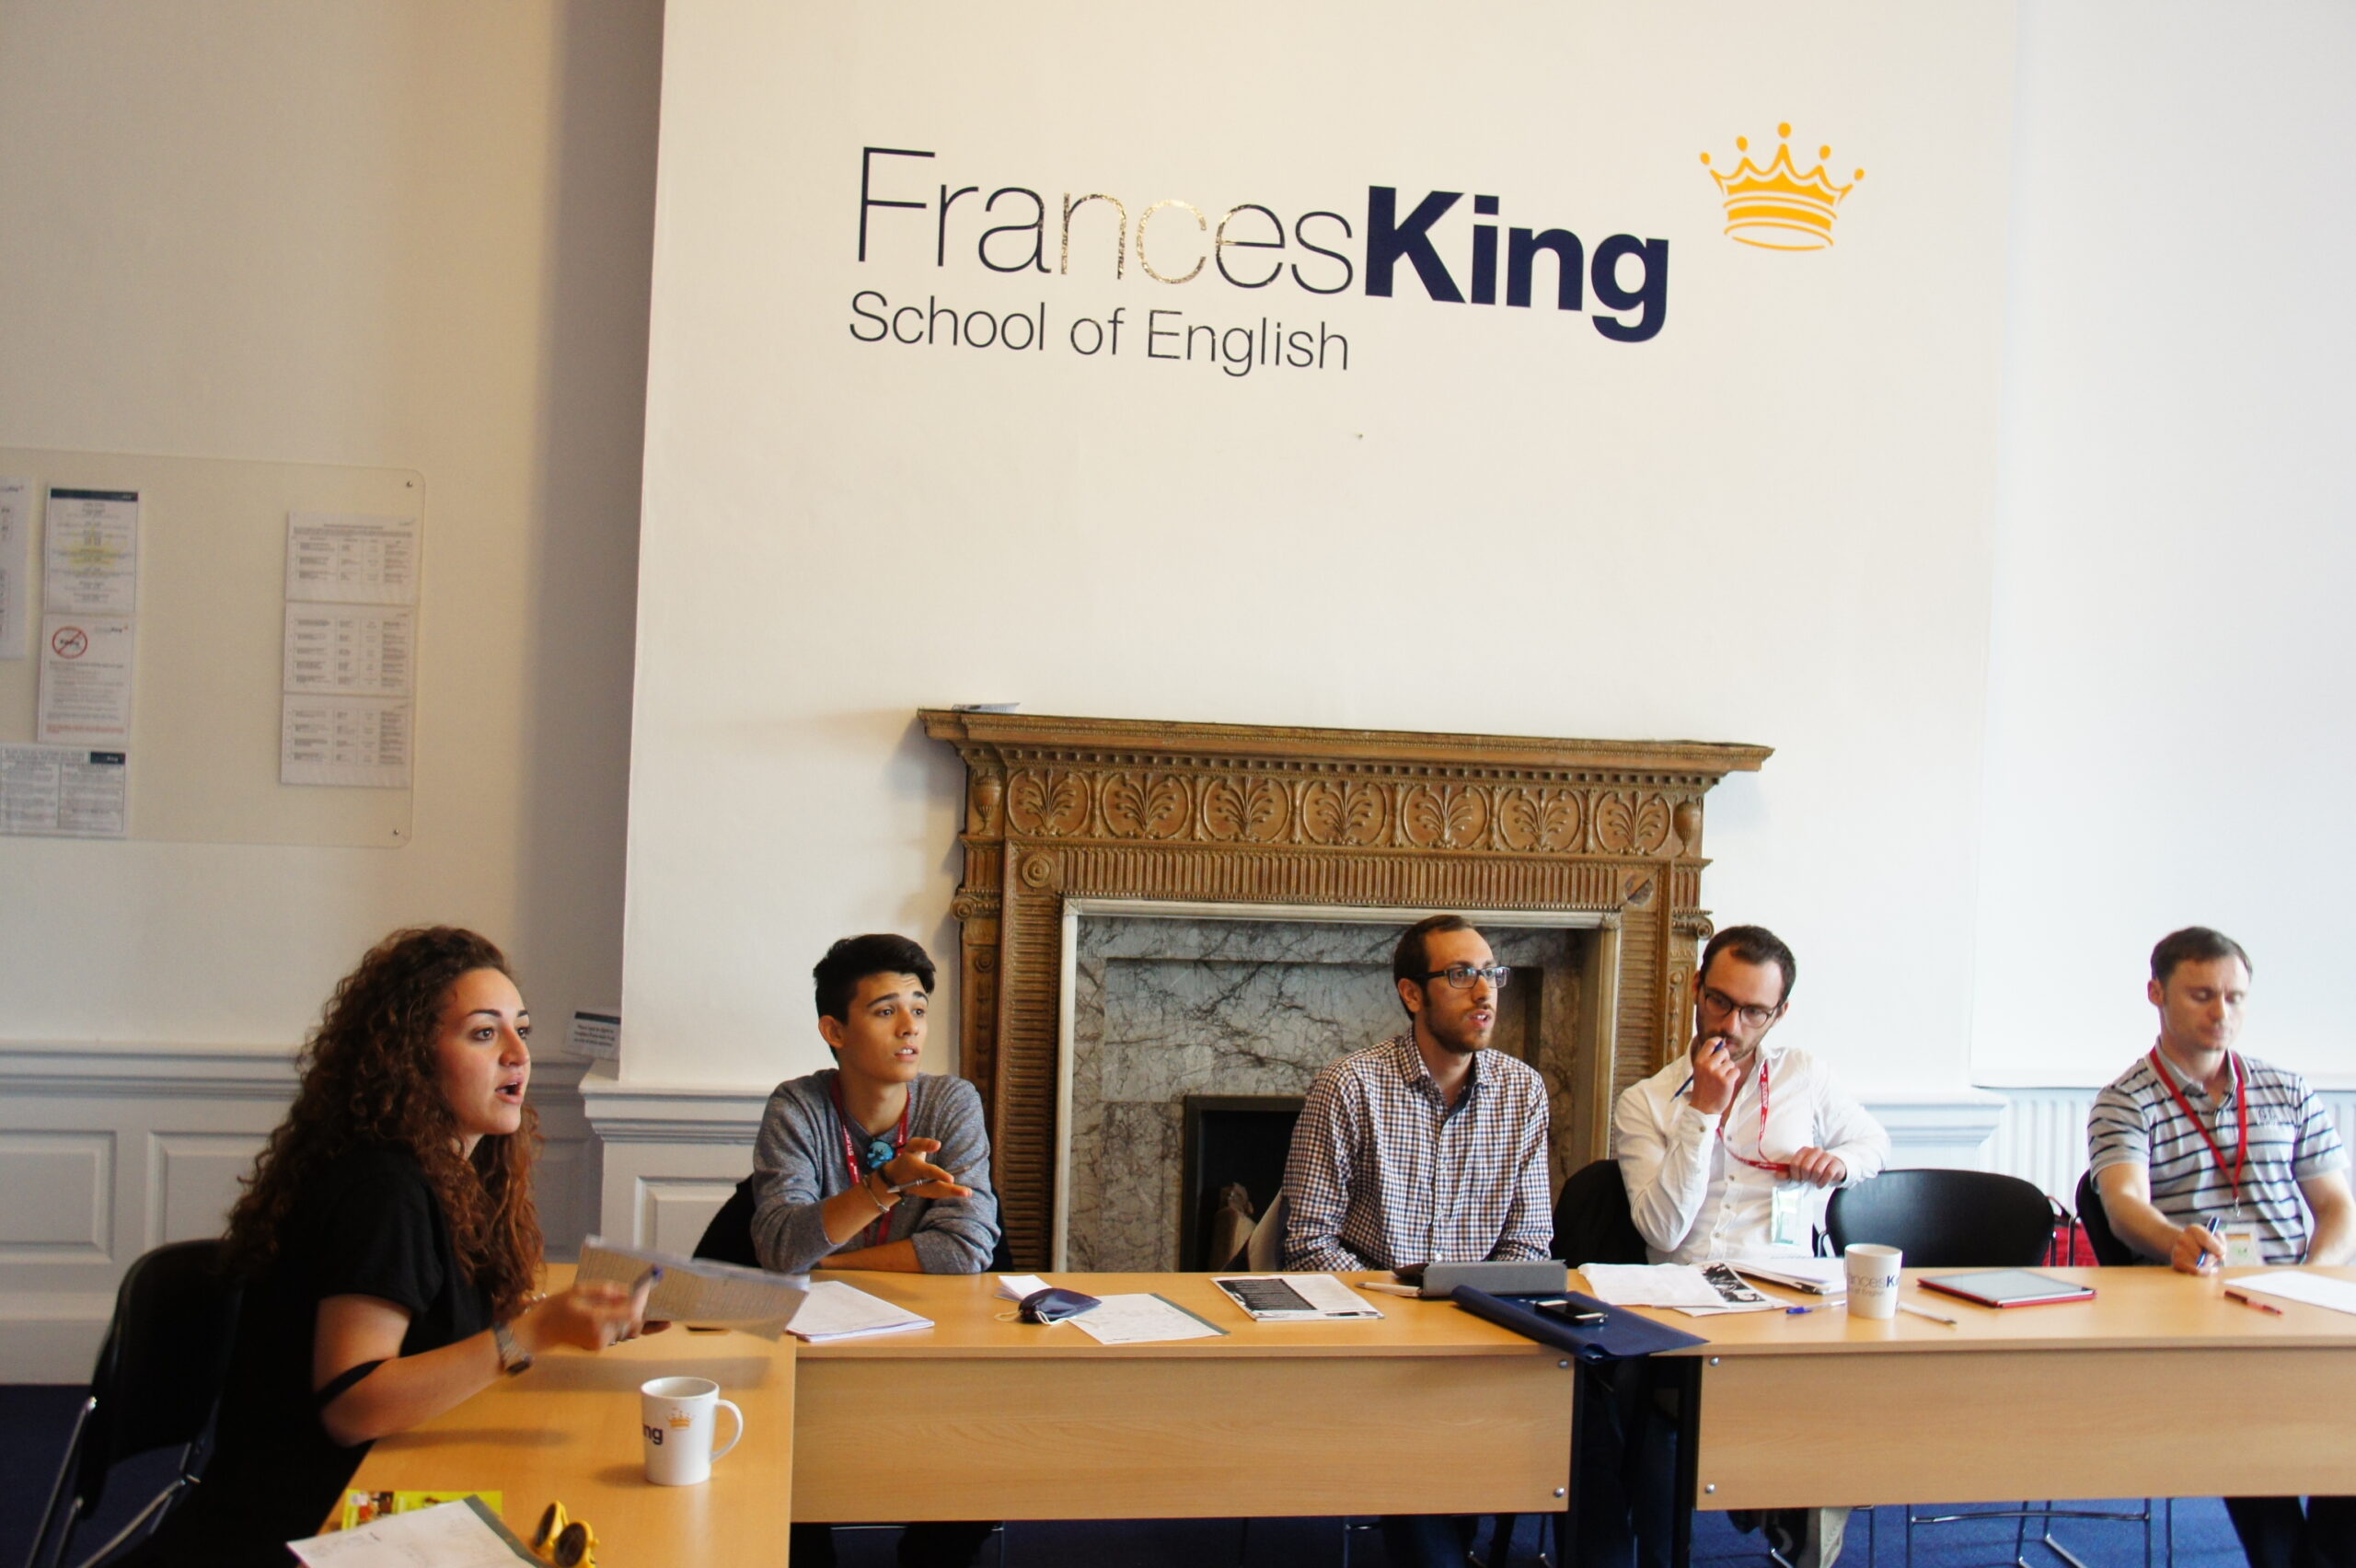 Frances King School of English reviews and school details